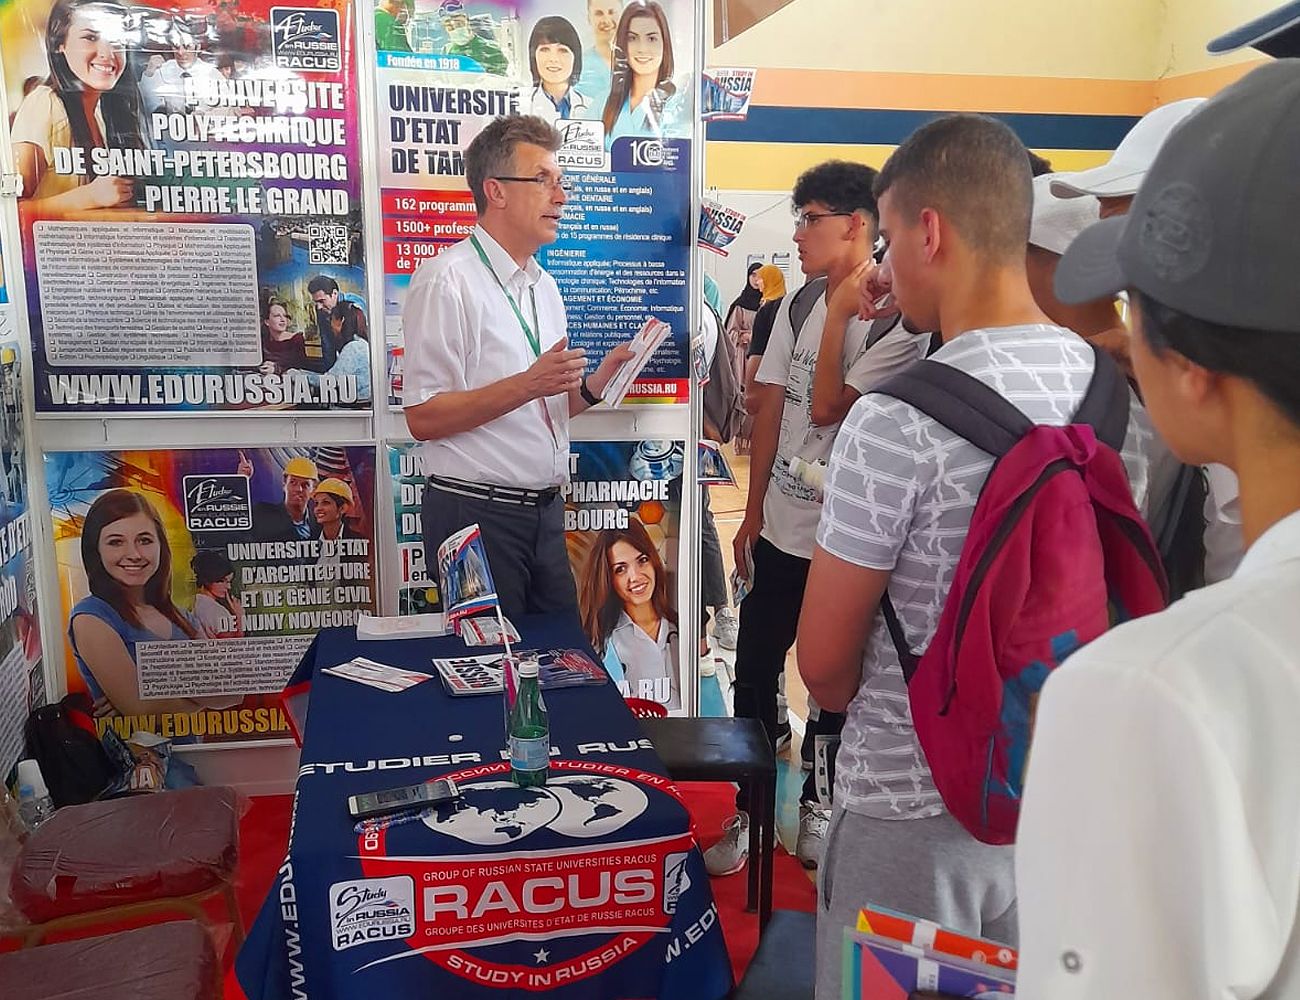 The brand "Study in Russia" is already acknowledged and loved by many Moroccans for its distinct advantages: the choice of 1,200 programs, the opportunity to study in French, Russian and English, the abundance of centuries-old universities, employment and Russian citizenship as well as the prospect of getting an internationally recognized diploma that allows to build a career anywhere in the world, including Russia and Morocco. All guests of the stand "Study in Russia — RACUS" received information brochures and other fashionable branded souvenirs.